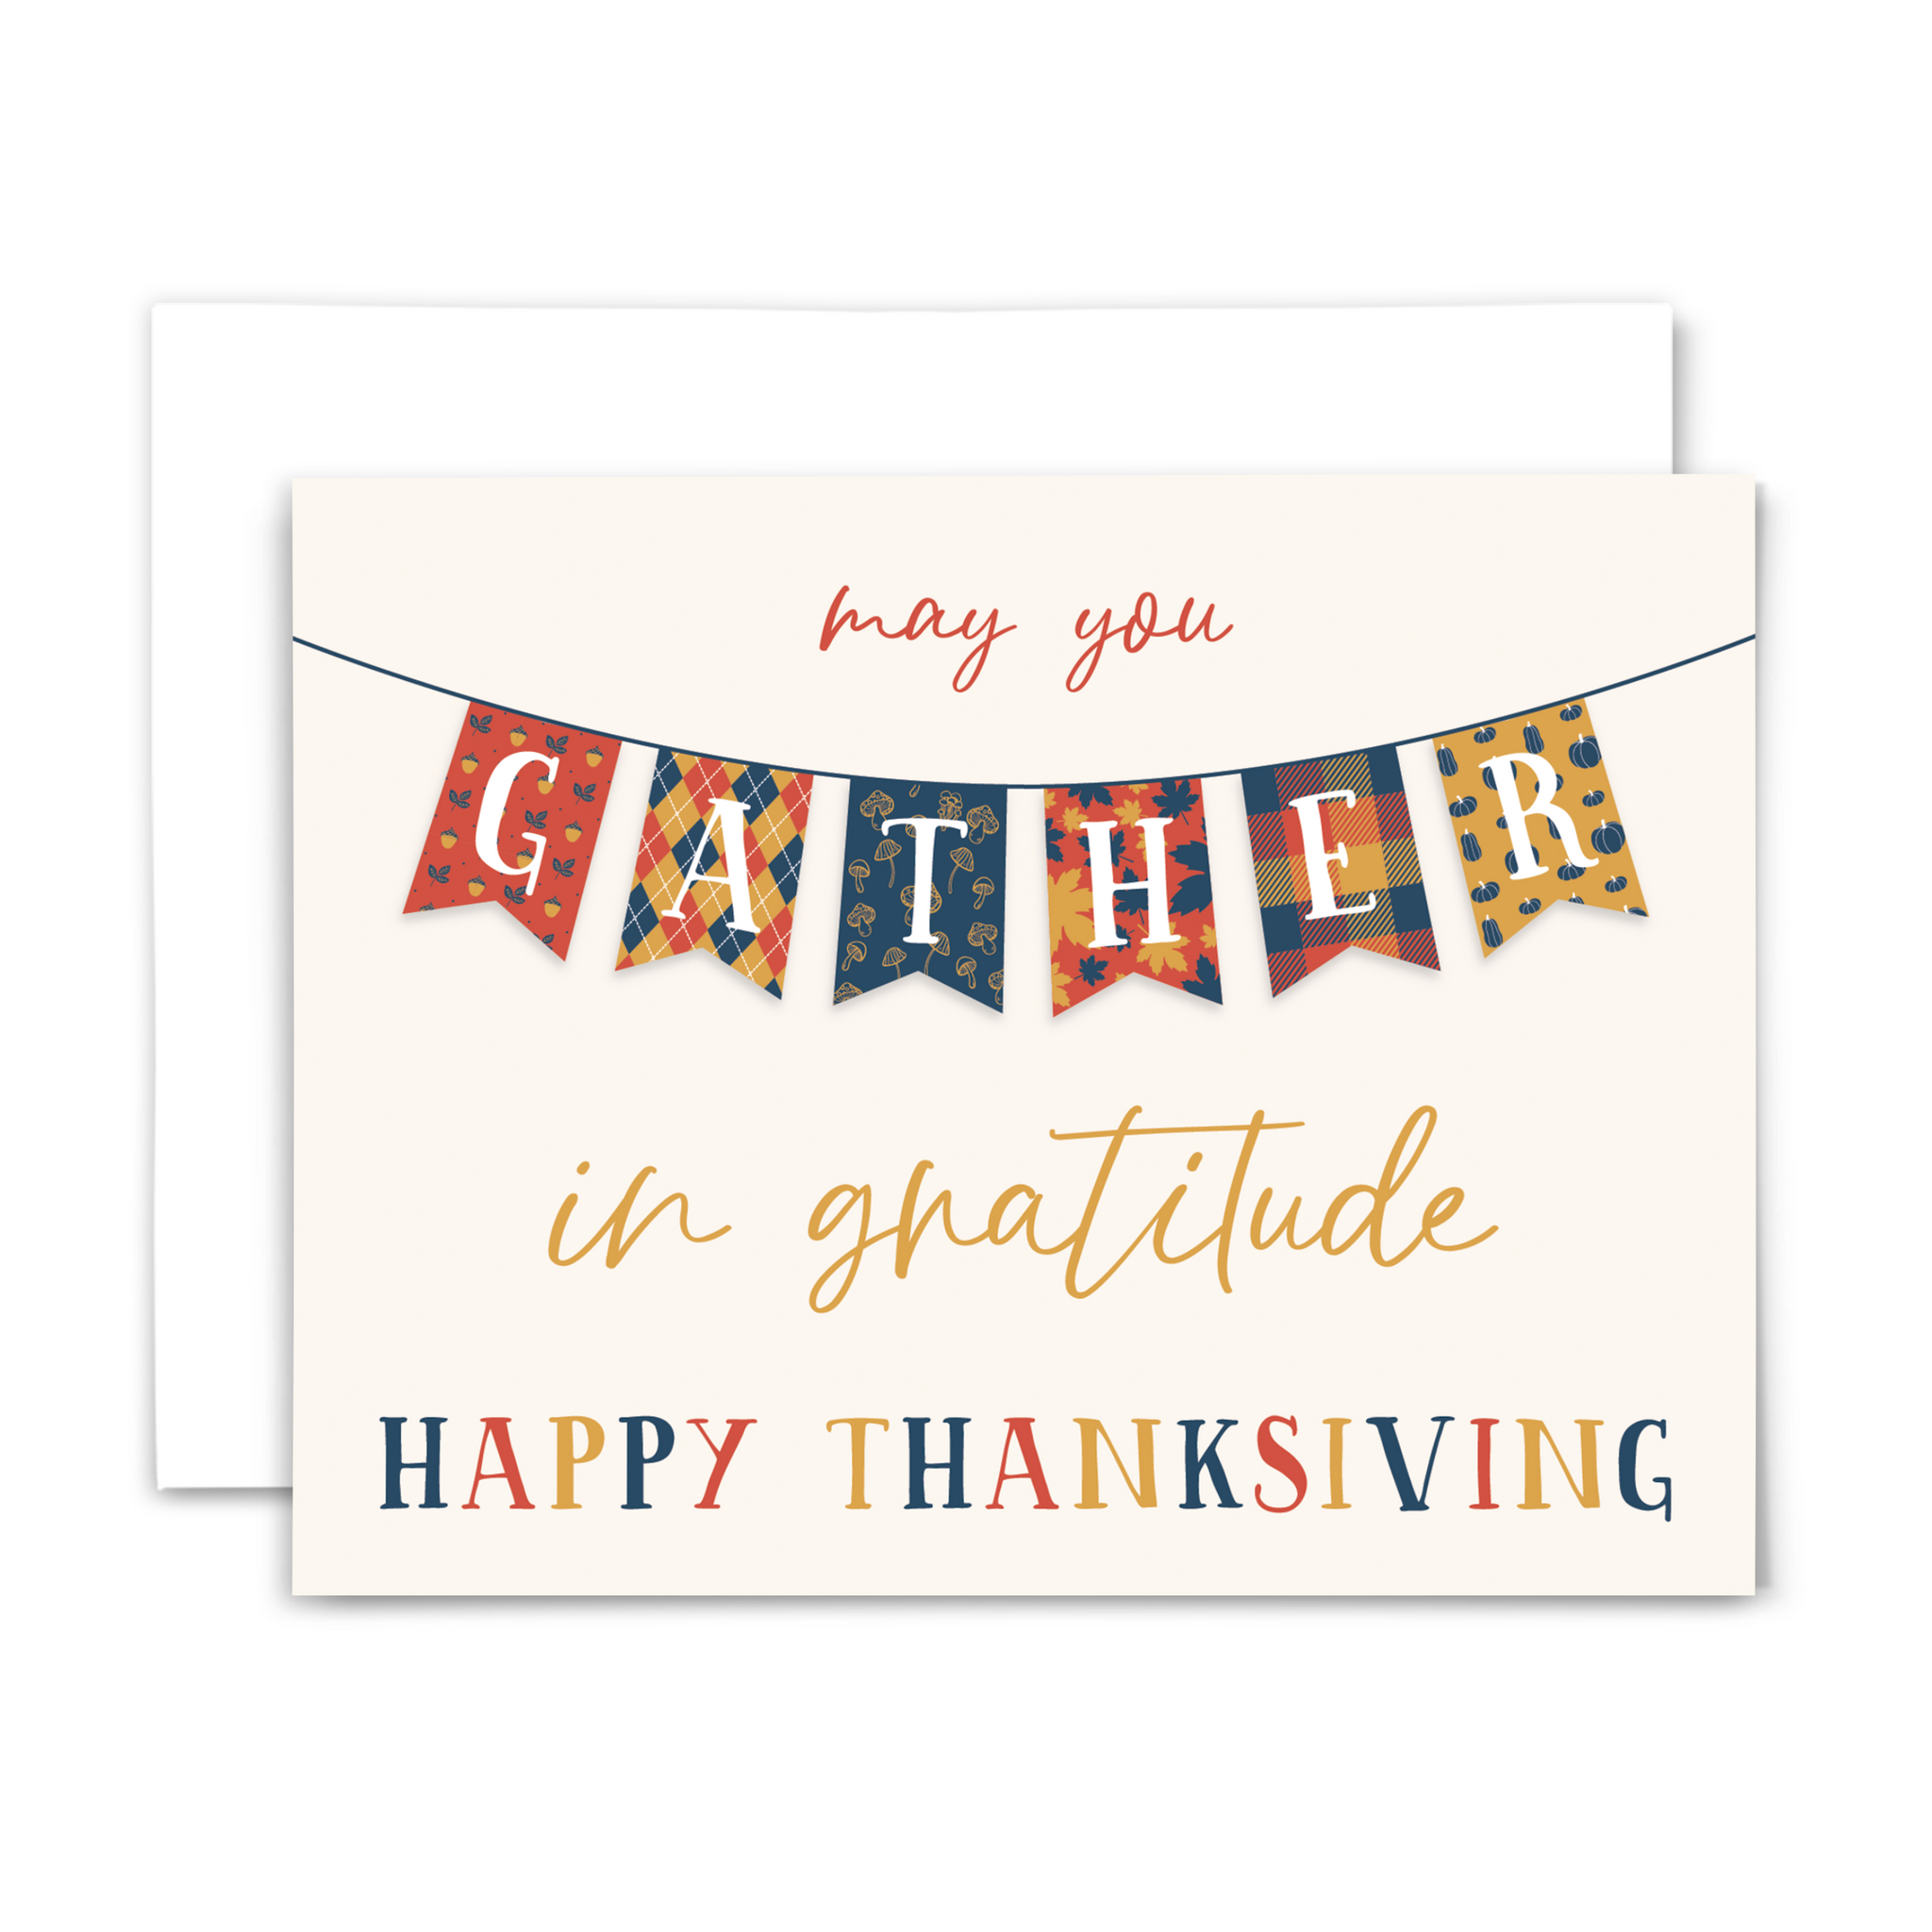 Thanksgiving greeting card "may you gather in gratitude ~ happy thanksgiving" in red, gold and navy blue fonts on cream background with "gather" in banner stretching horizontally across card with autumn patterns; with white envelope